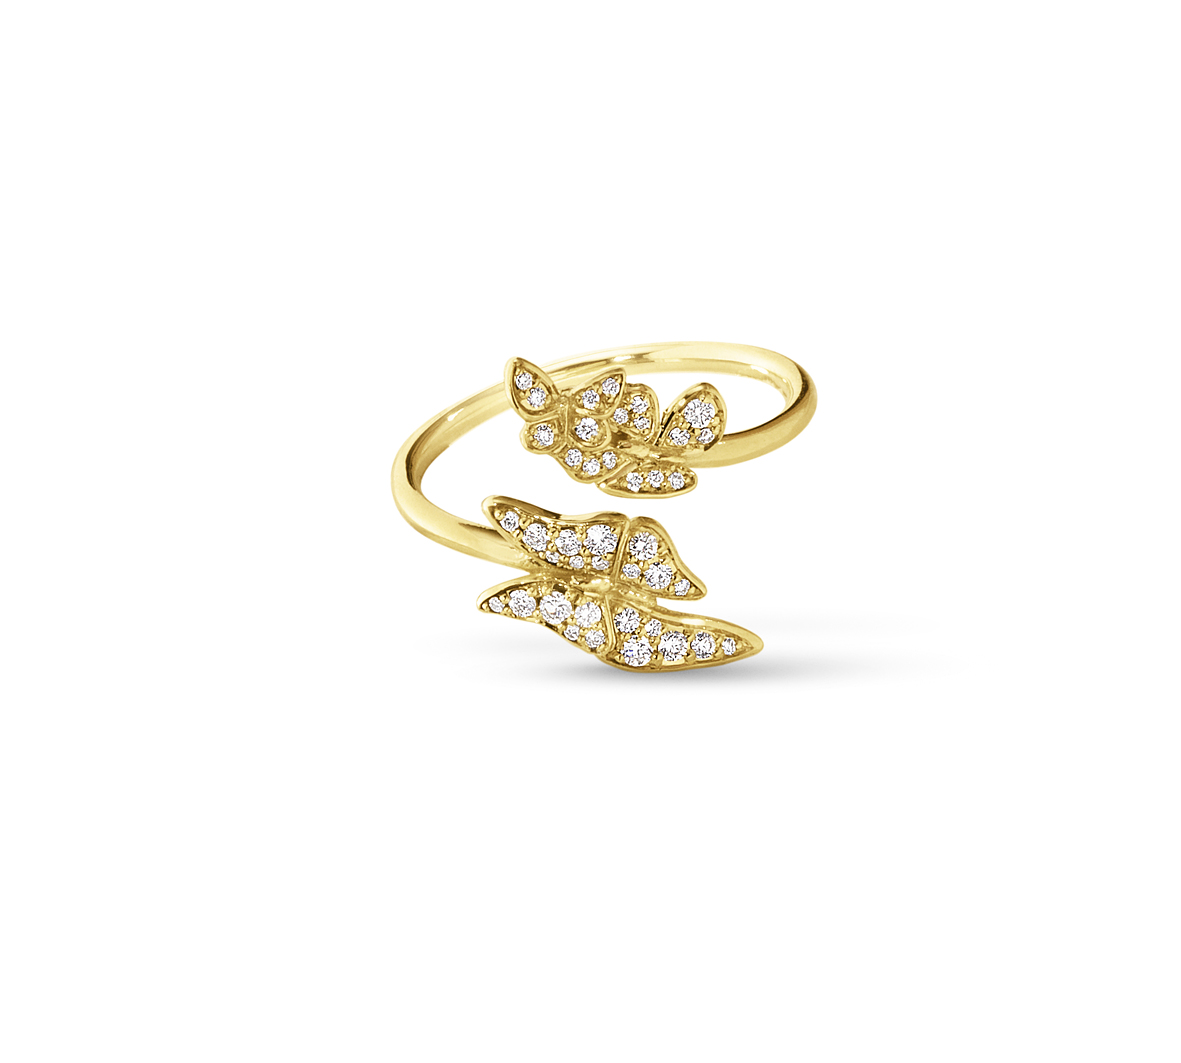   The Askill Collection for Georg Jensen  Butterfly ring in 18K gold and diamonds. 